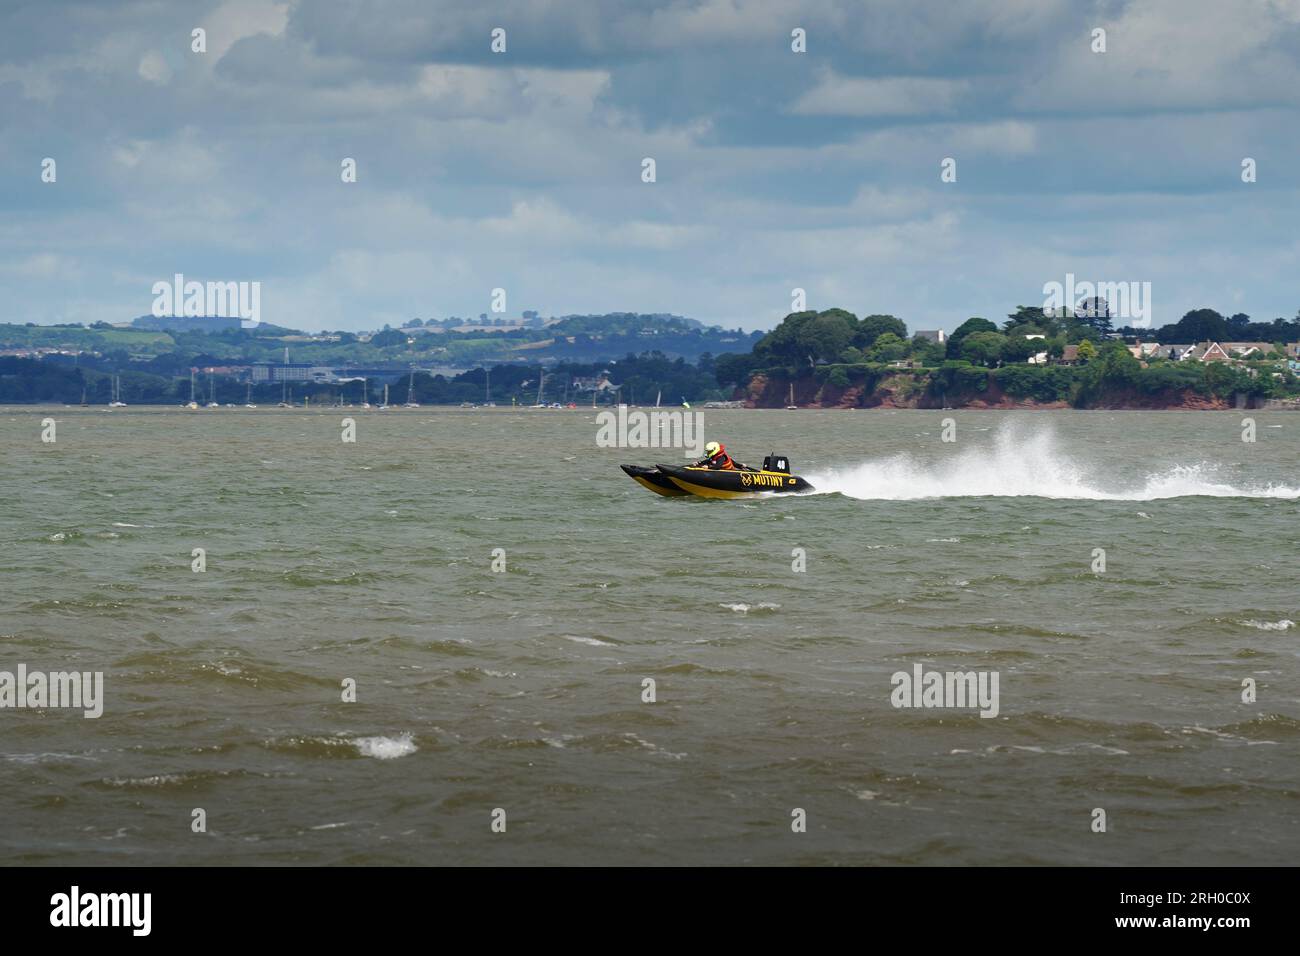 Exmouth, UK - August 2023:A twin hull catamaran racing in the river Exe estuary in Exmouth, UK Stock Photo